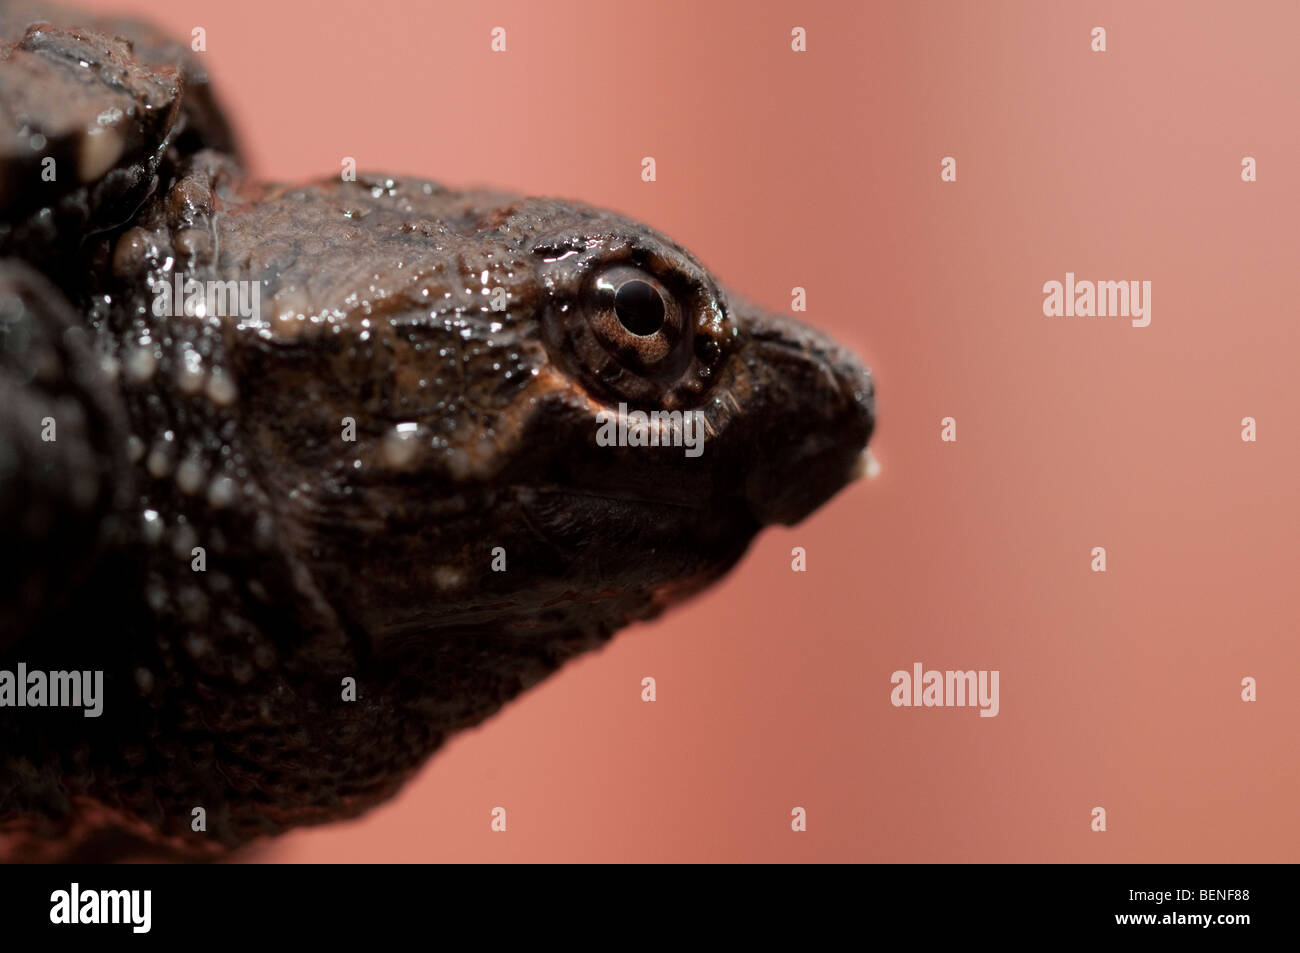 Baby snapping turtle. Stock Photo